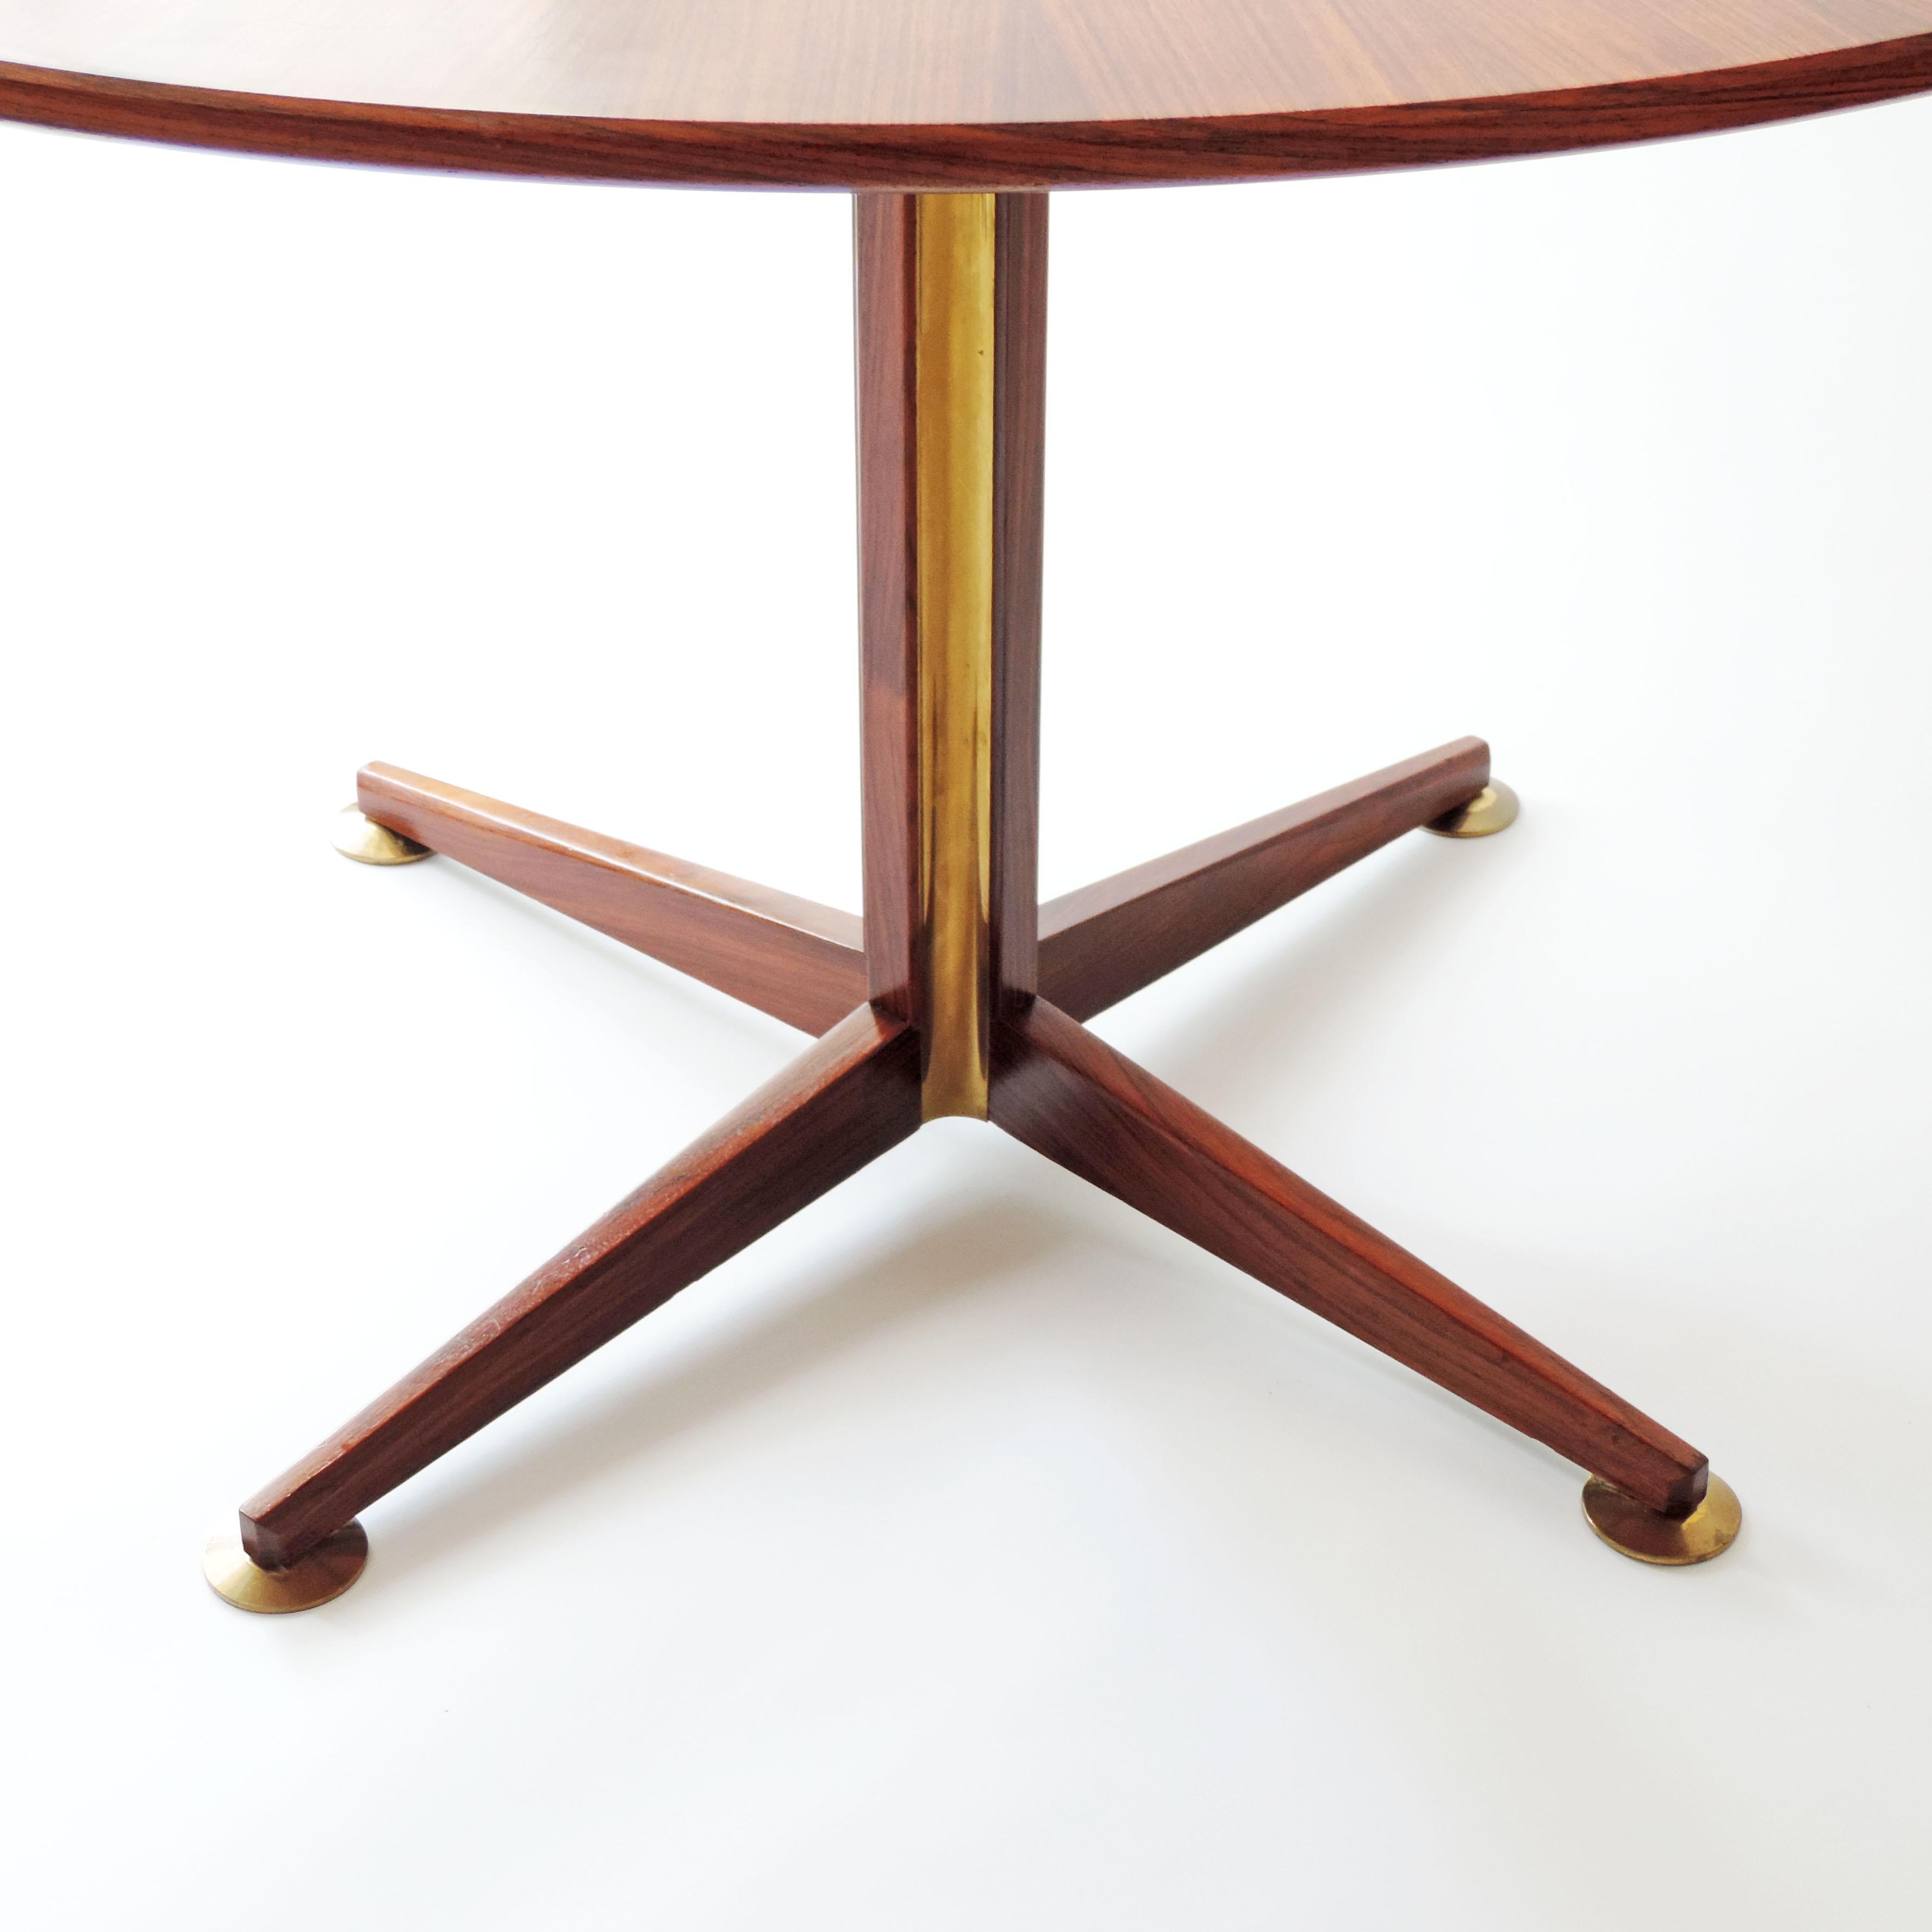 Metal Osvaldo Borsani circular dining table in wood and brass details, Italy, 1960s For Sale